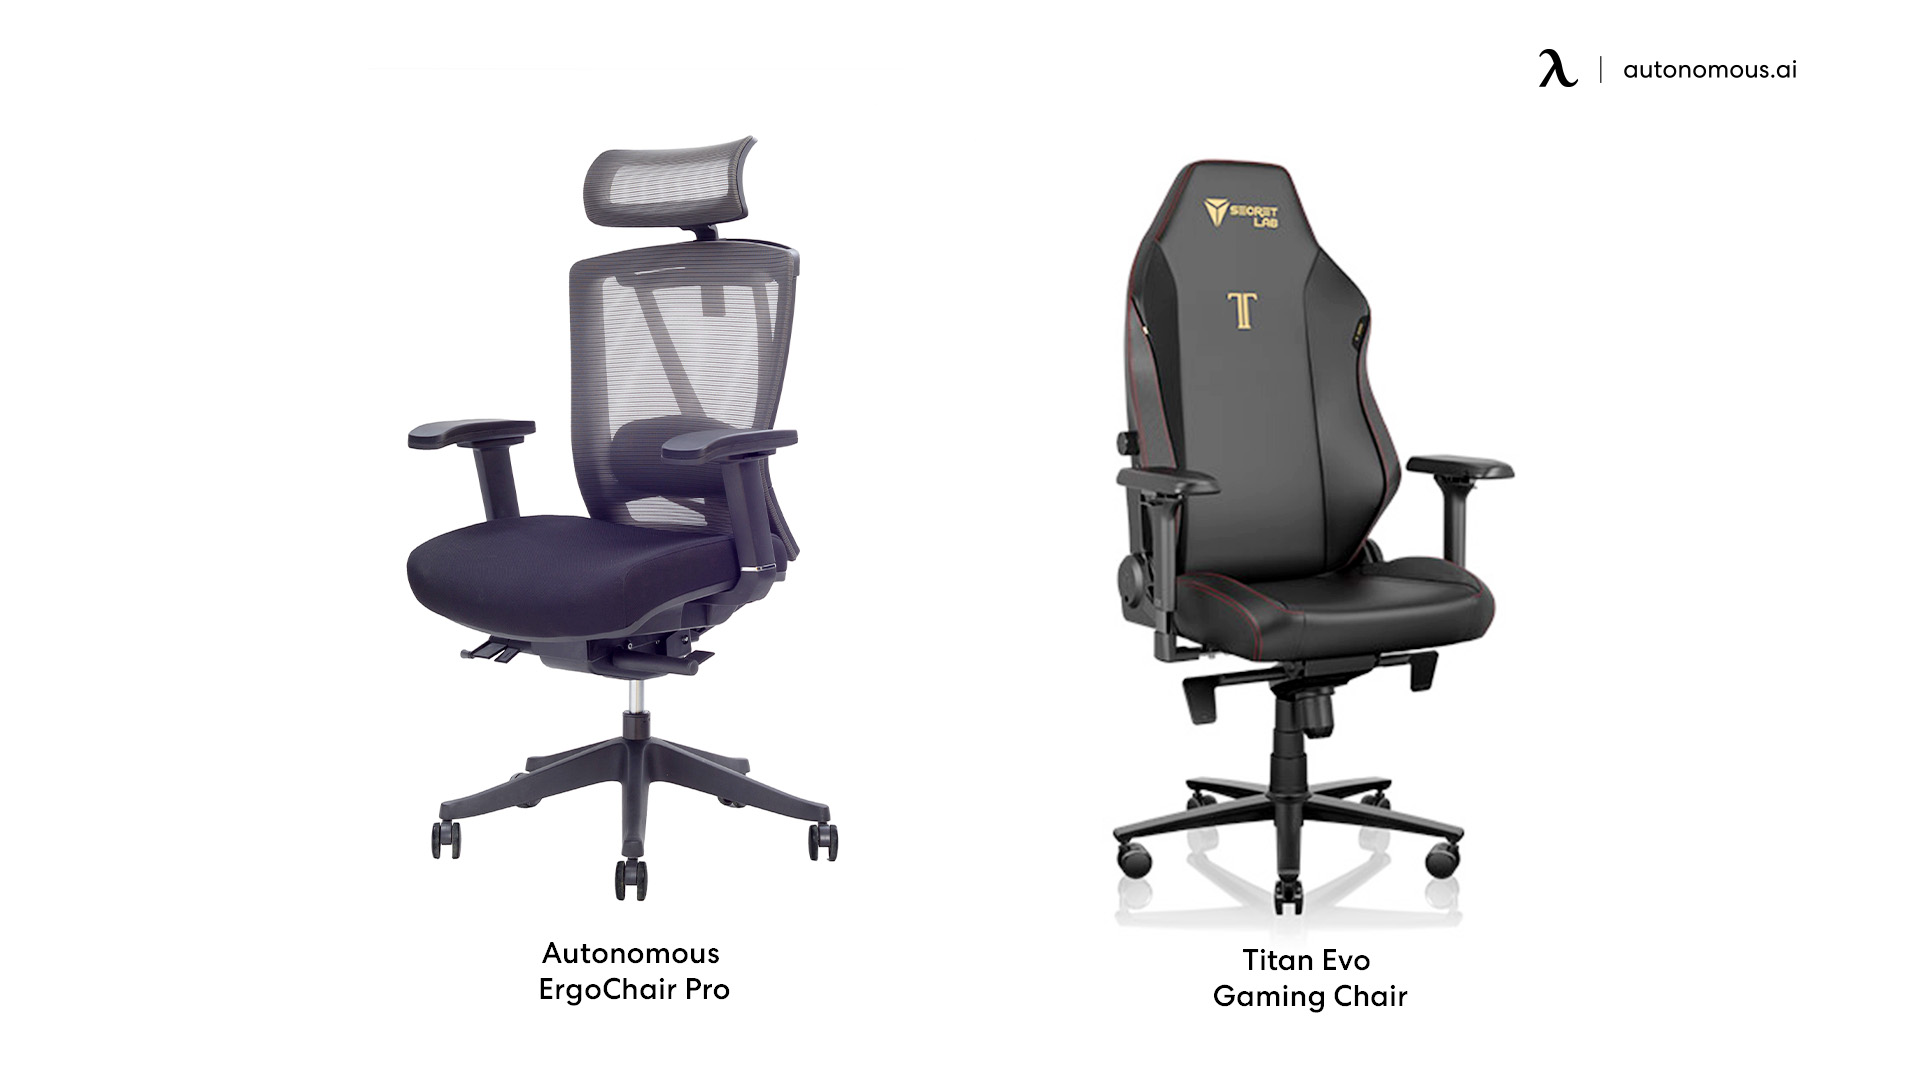 Is it better to get an office chair or a gaming chair